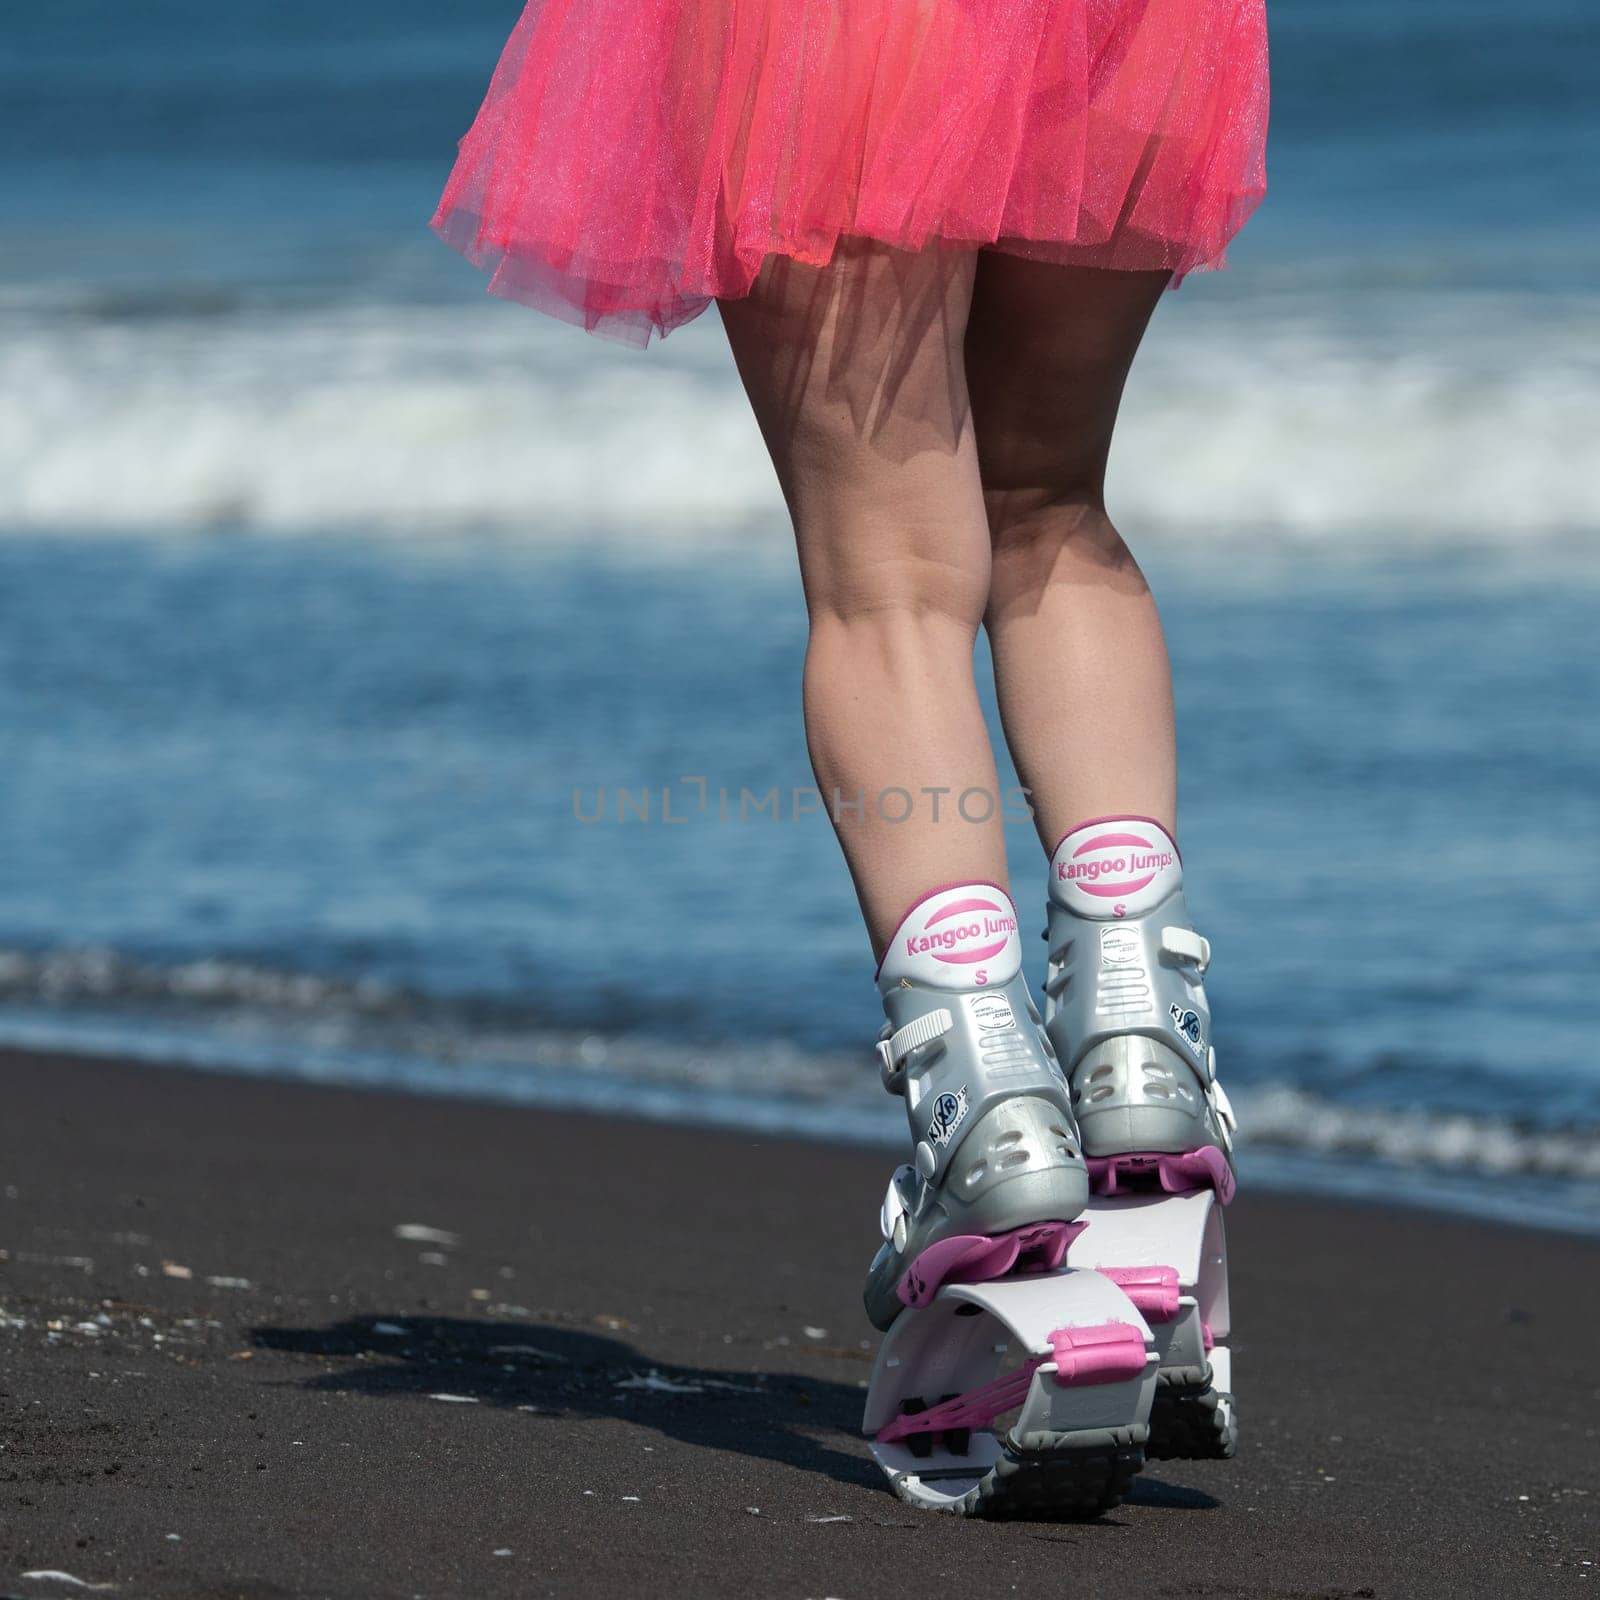 KAMCHATKA, RUSSIA - JUNE 15, 2022: Rear view sportive woman legs in Kangoo Jumps sports boots and short pink skirt running on beach during aerobic exercise outdoors. Low section, waist down, crop view